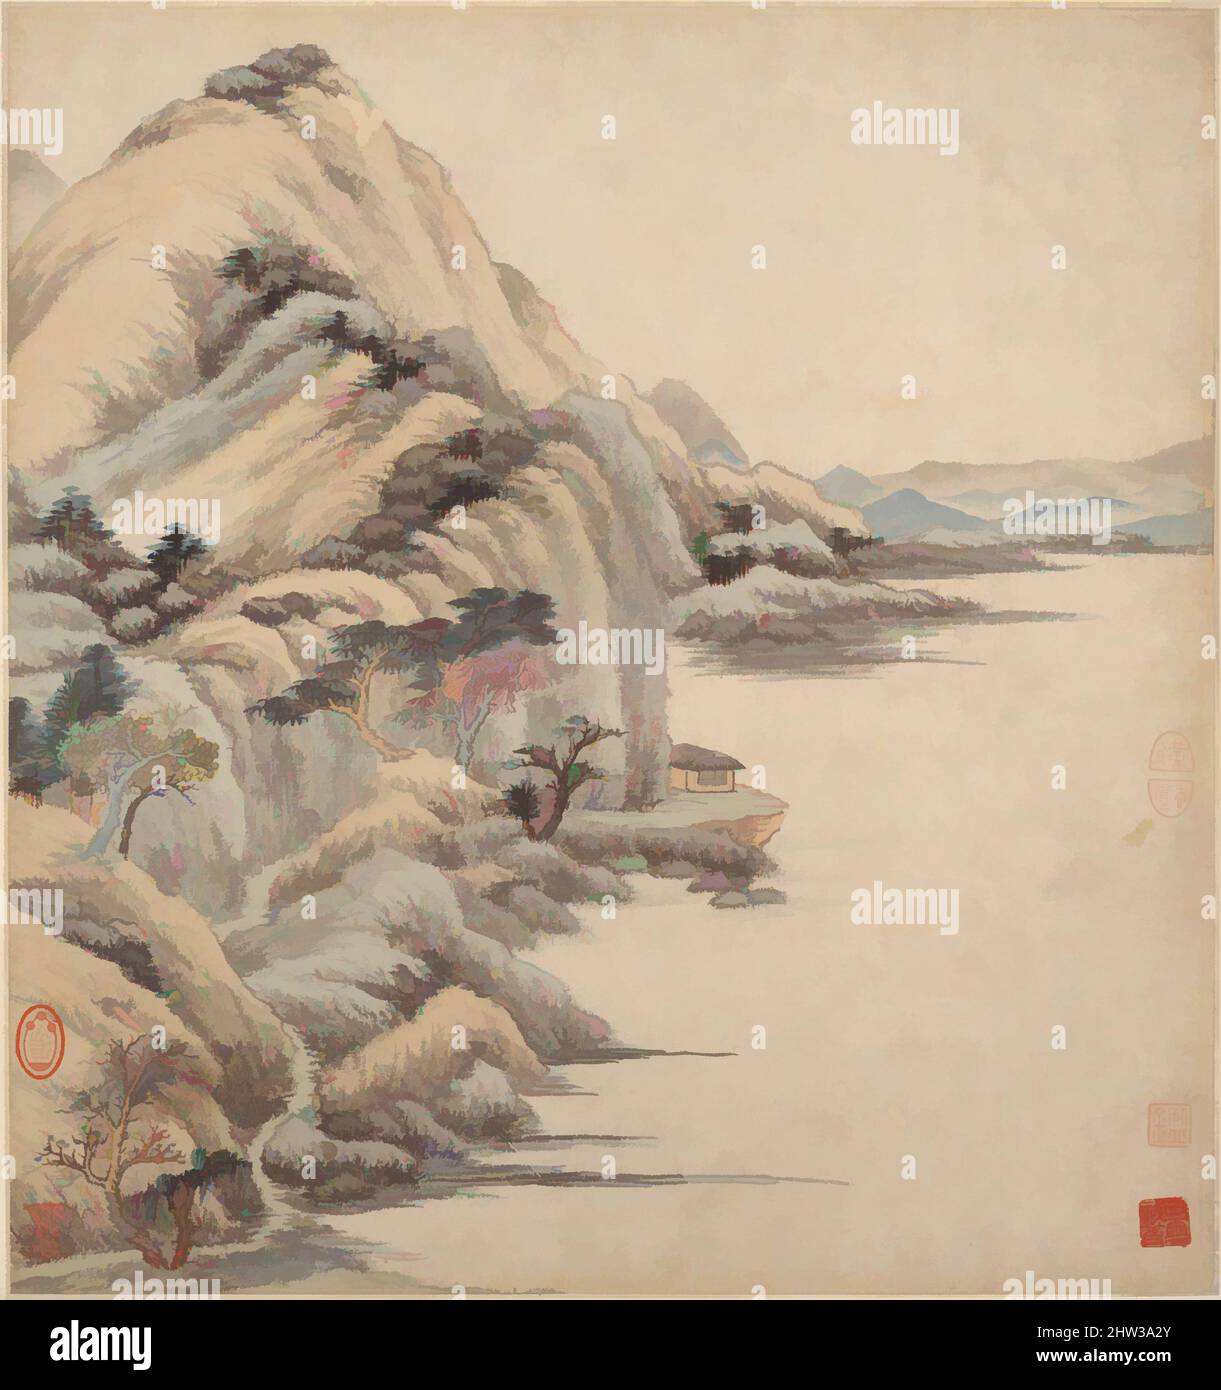 Art inspired by 清 王鑑 仿古山水圖 冊 紙本, Landscapes in the styles of ancient masters, Qing dynasty (1644–1911), 17th century, China, Album of eighteen leaves; ink and color on paper, 11 3/4 x 12 3/8 in. (29.8 x 31.4 cm), Paintings, Wang Jian (Chinese, 1609–1677 or 1688), Wang Jian's paintings, Classic works modernized by Artotop with a splash of modernity. Shapes, color and value, eye-catching visual impact on art. Emotions through freedom of artworks in a contemporary way. A timeless message pursuing a wildly creative new direction. Artists turning to the digital medium and creating the Artotop NFT Stock Photo